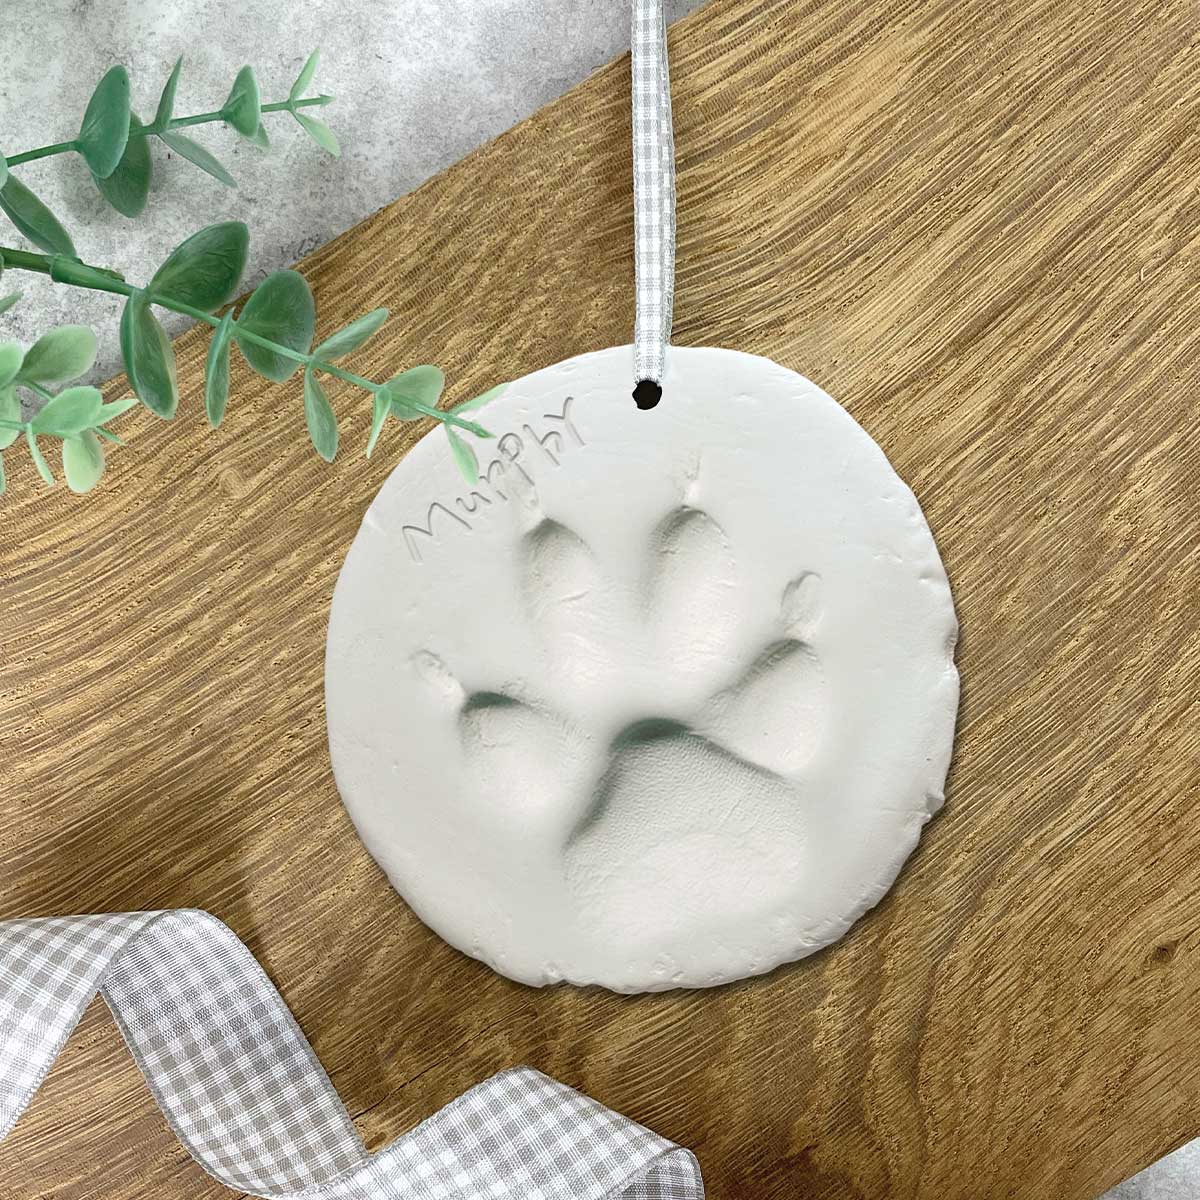 Pet Memorial Box Picture Frame with Paw Print Mold Kit - 3 Colors